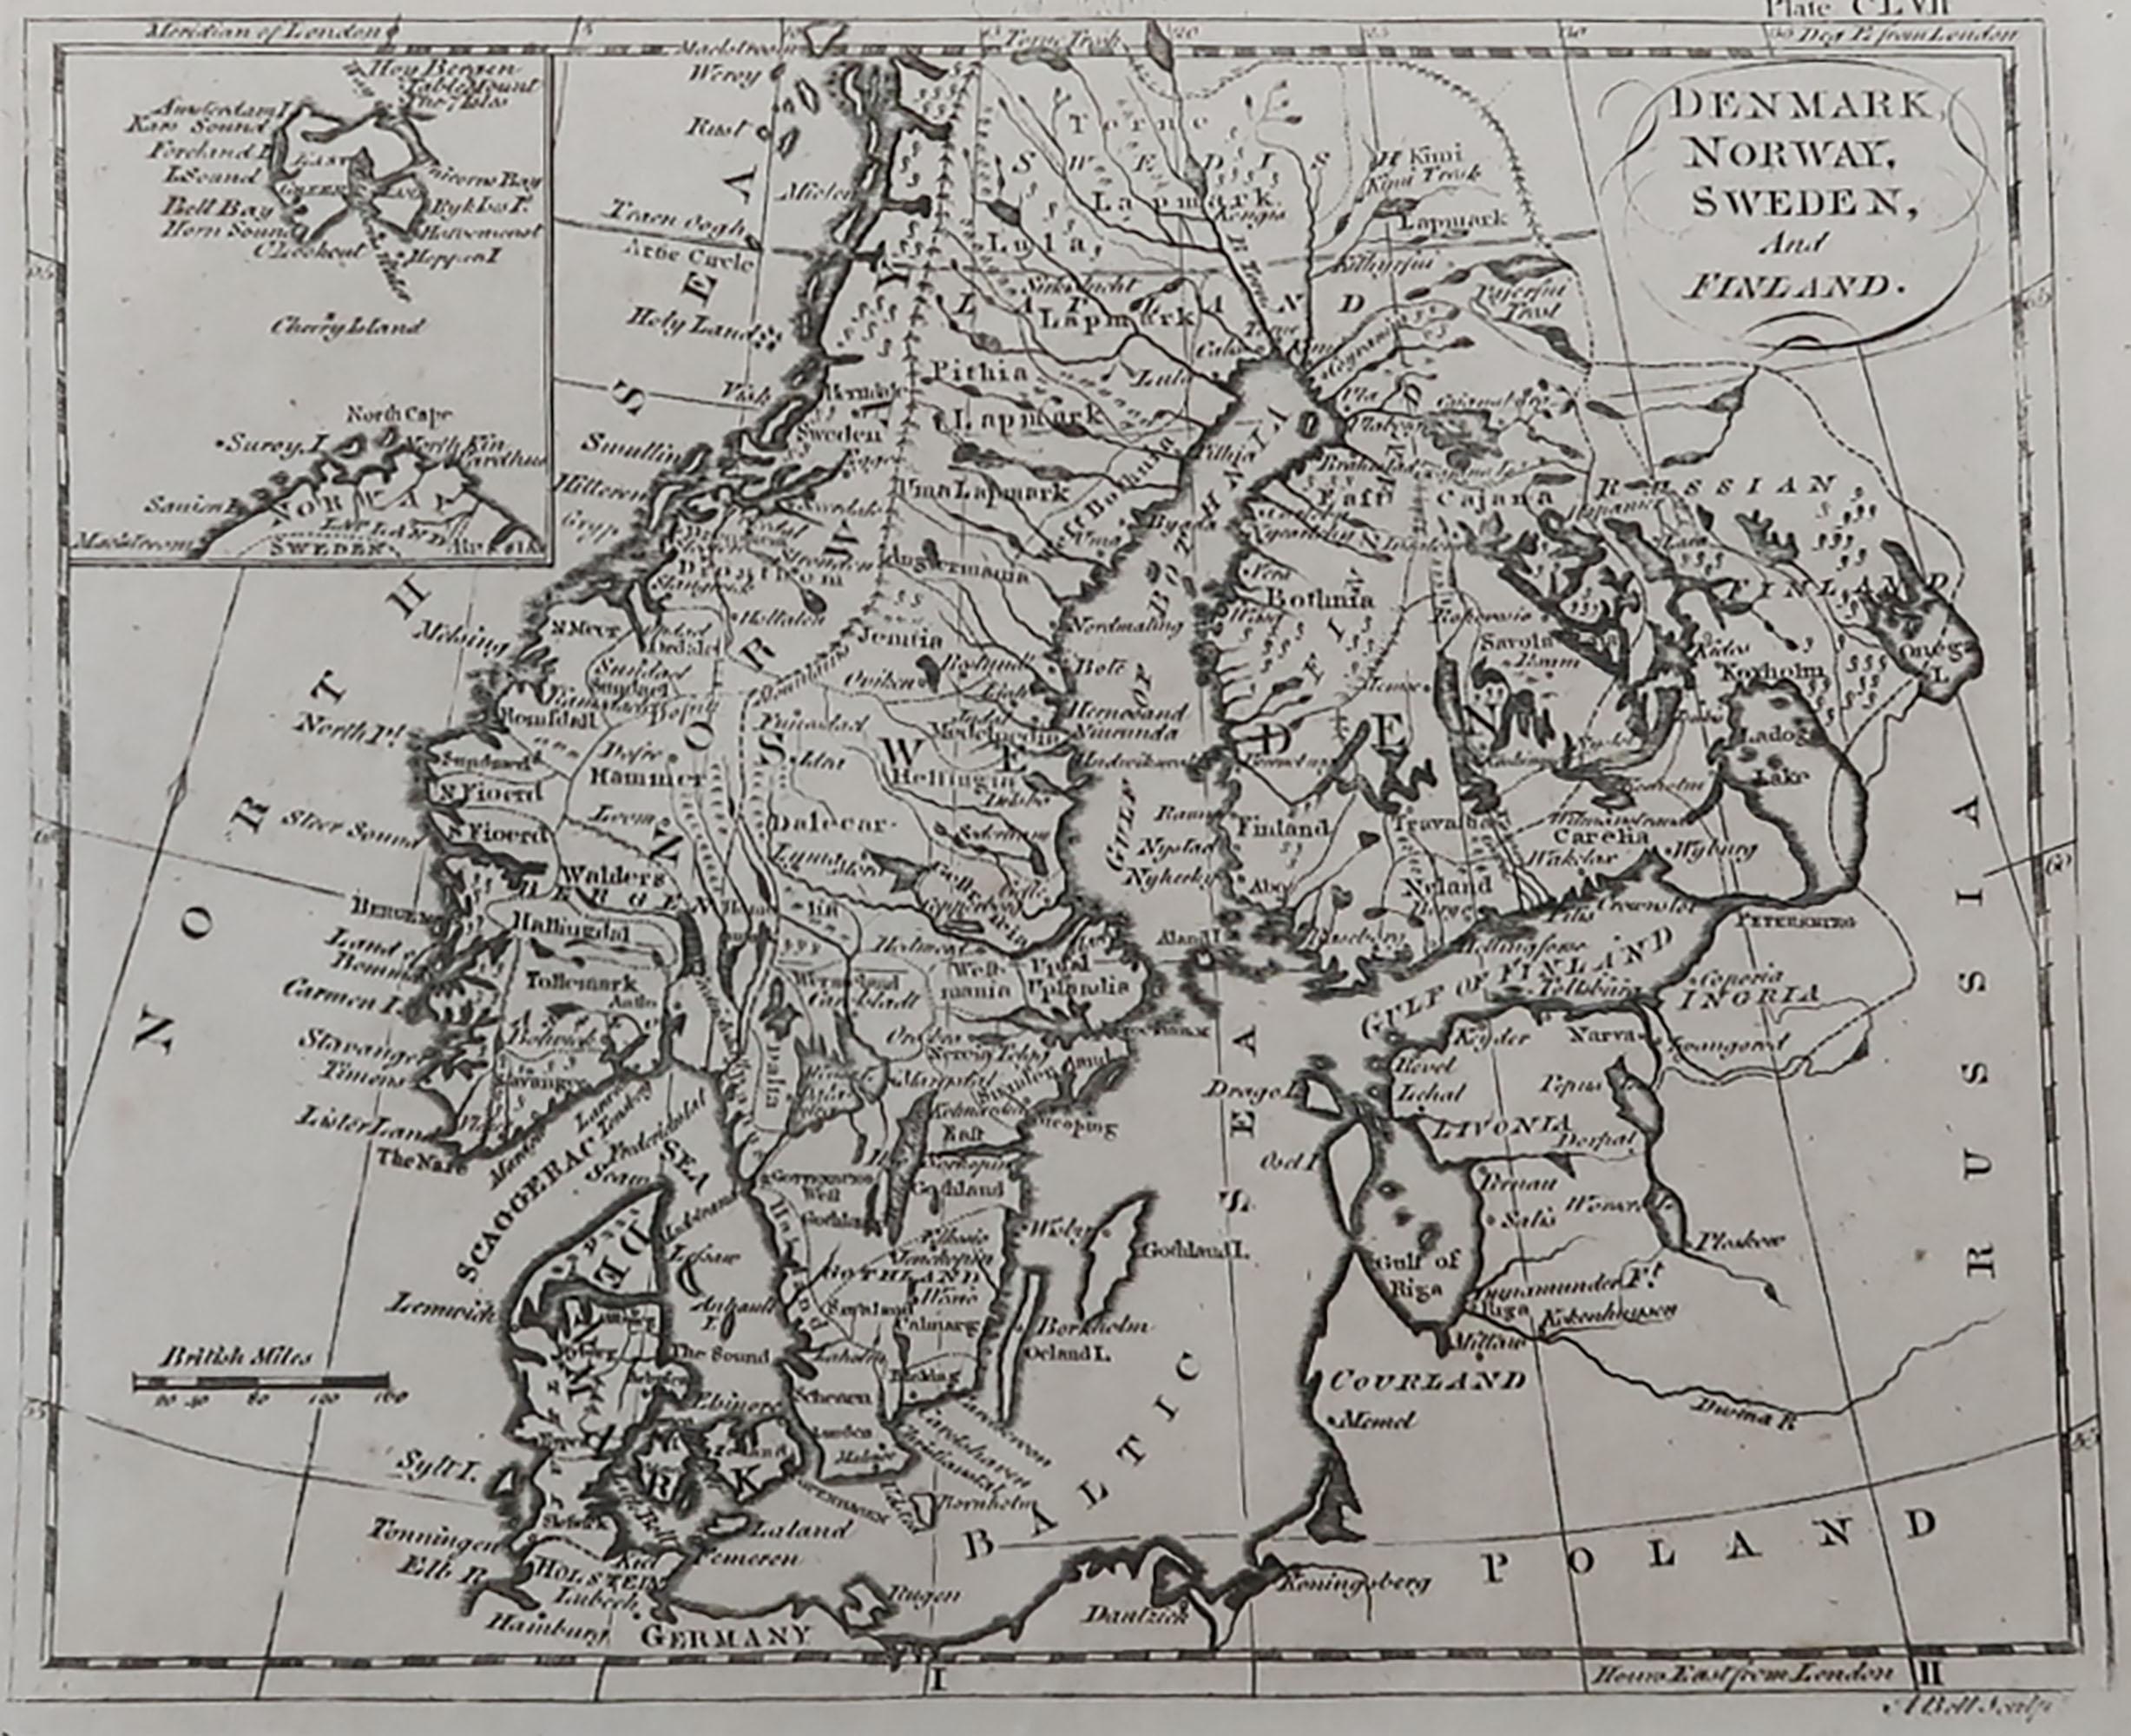 Other Original Antique Map of Sweden, Norway, Denmark and Finland, circa 1790